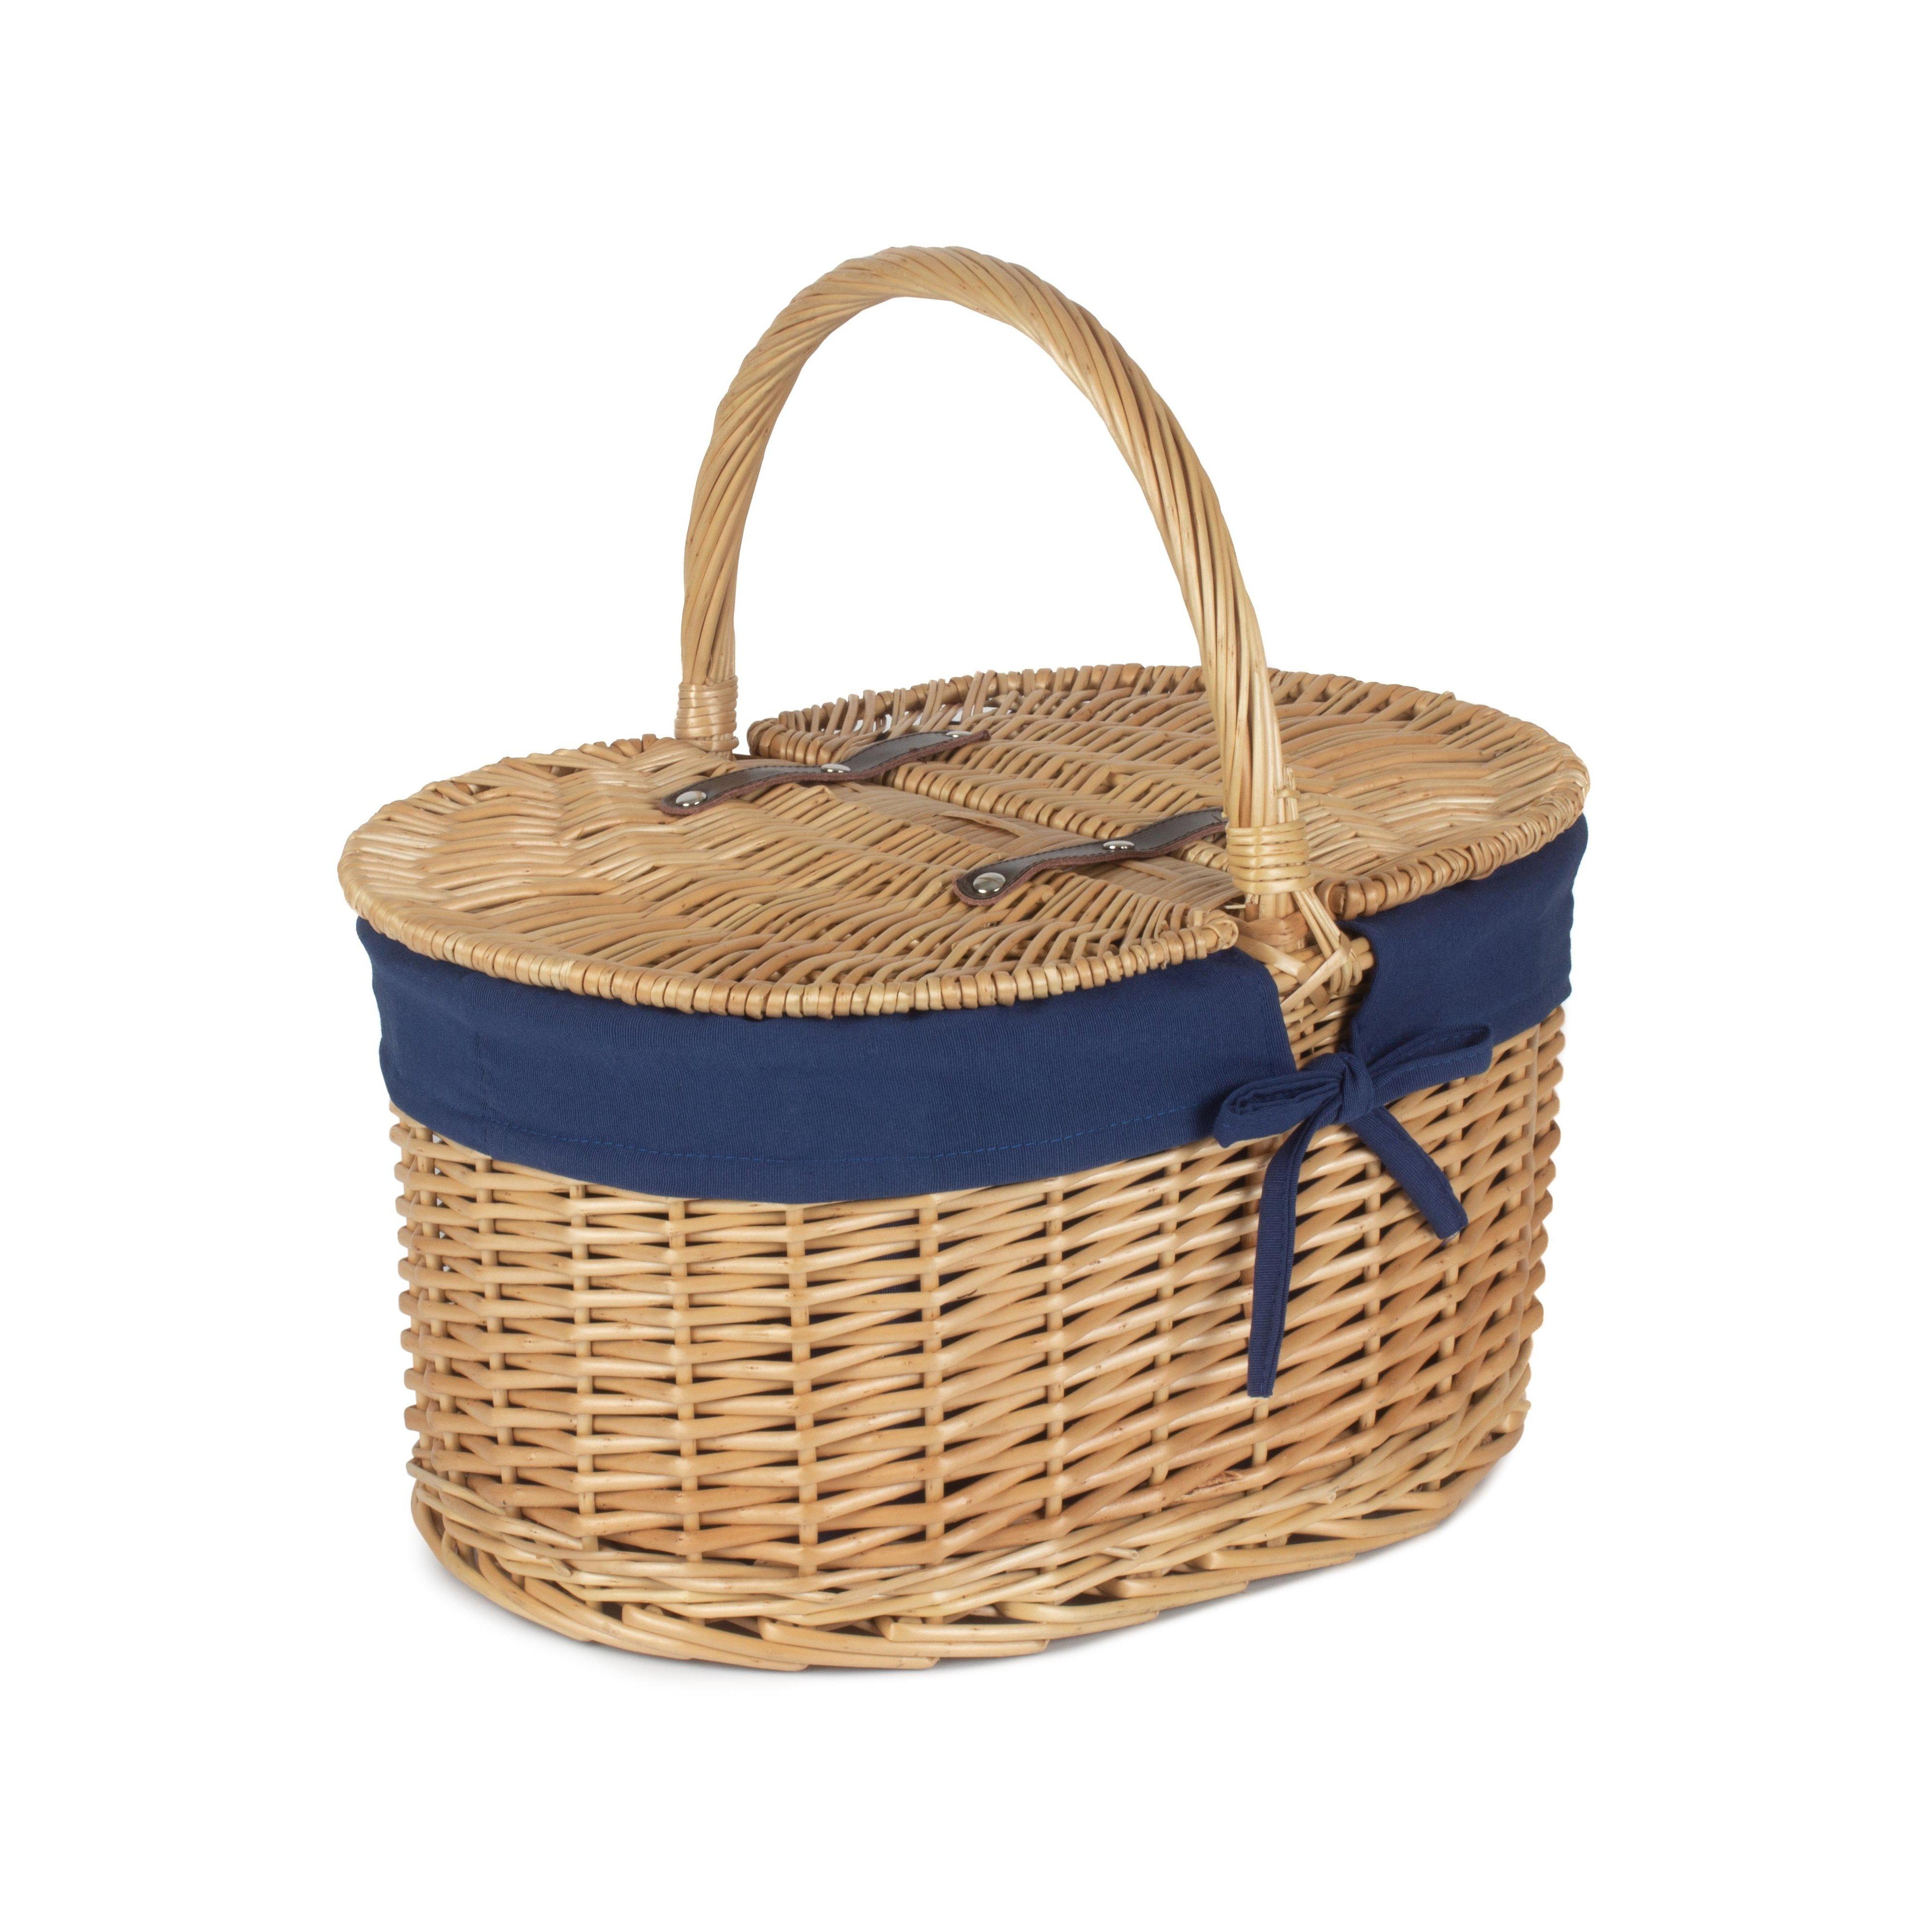 Wicker Oval Lidded Picnic Shopping Basket With Navy Blue Lining